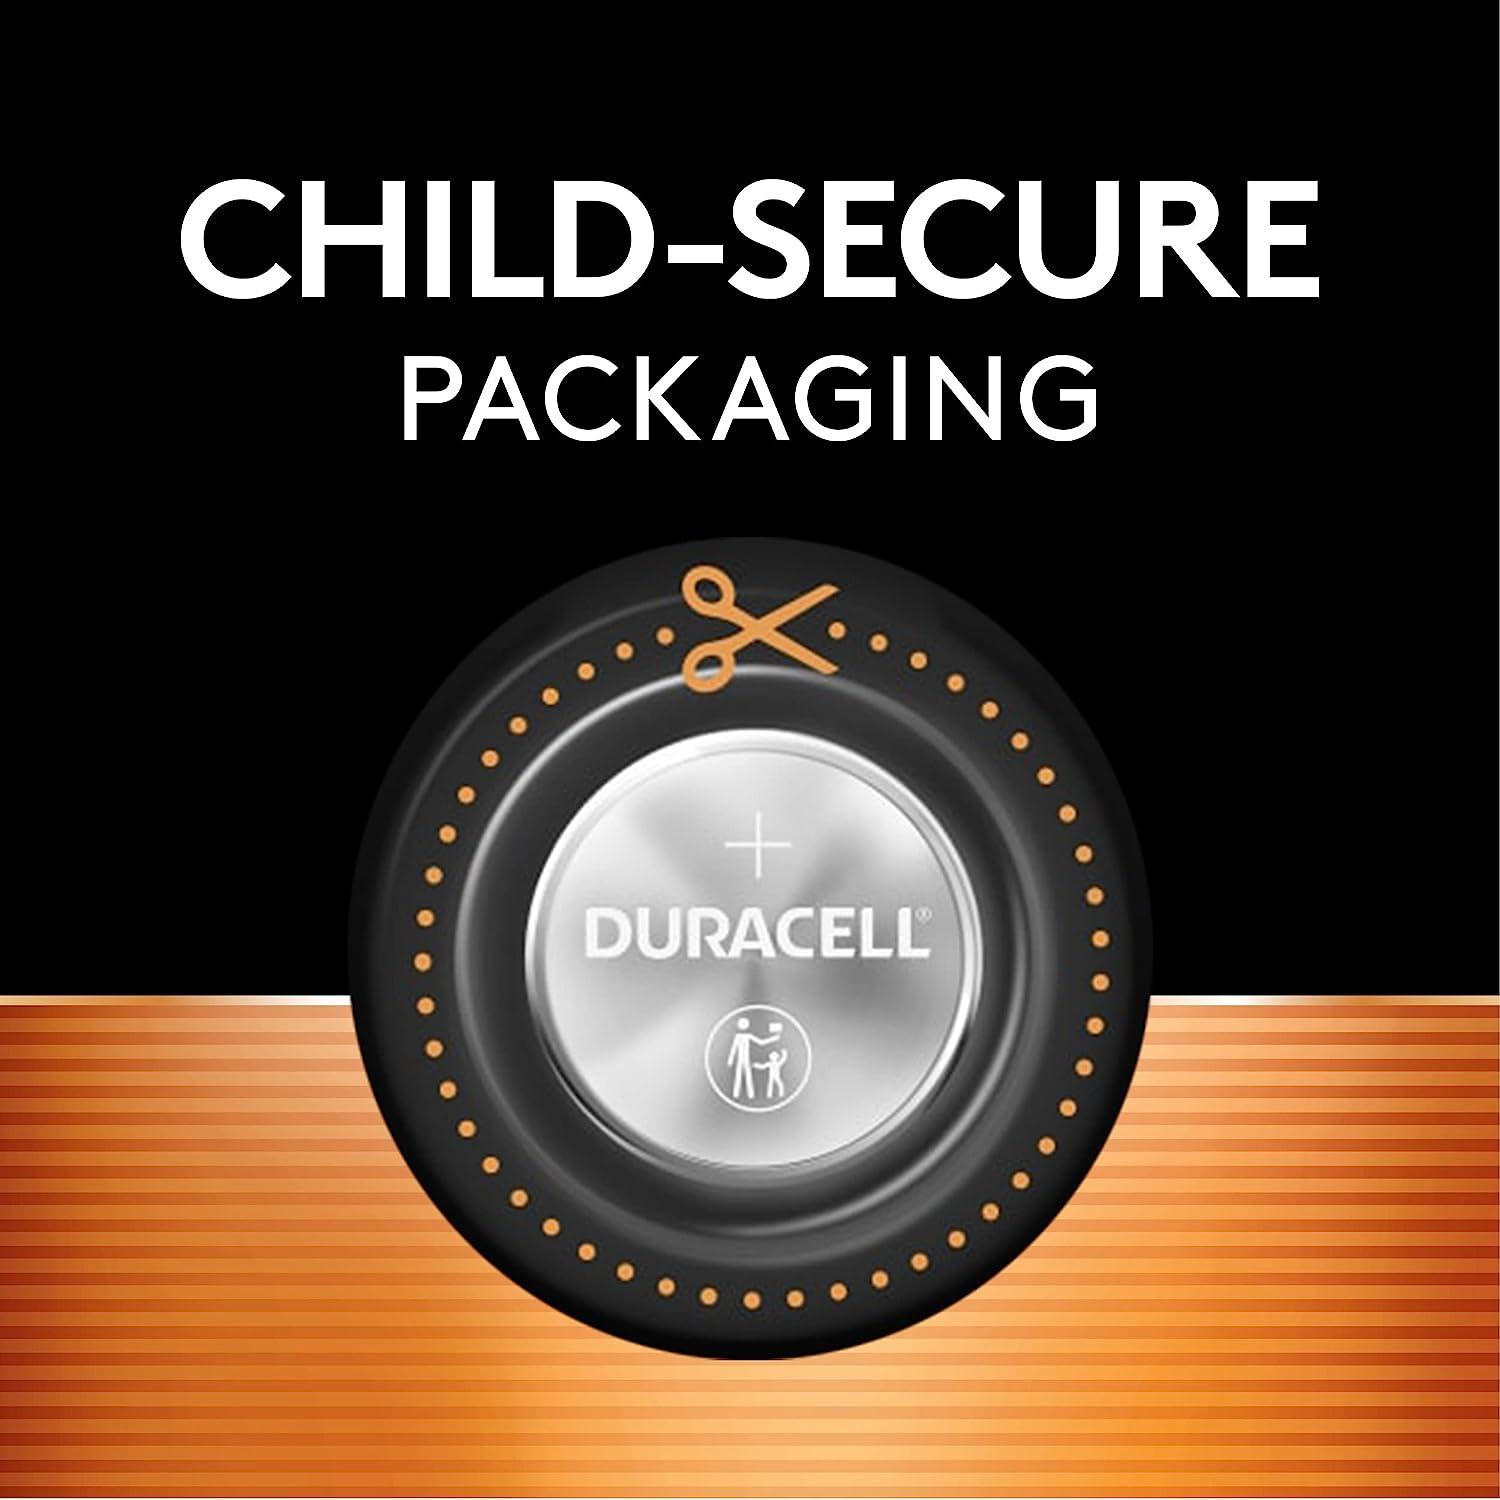 Duracell CR2016 3V Lithium Battery, Child Safety Features, 2 Count Pack,  Lithium Coin Battery for Key Fob, Car Remote, Glucose Monitor, CR Lithium 3